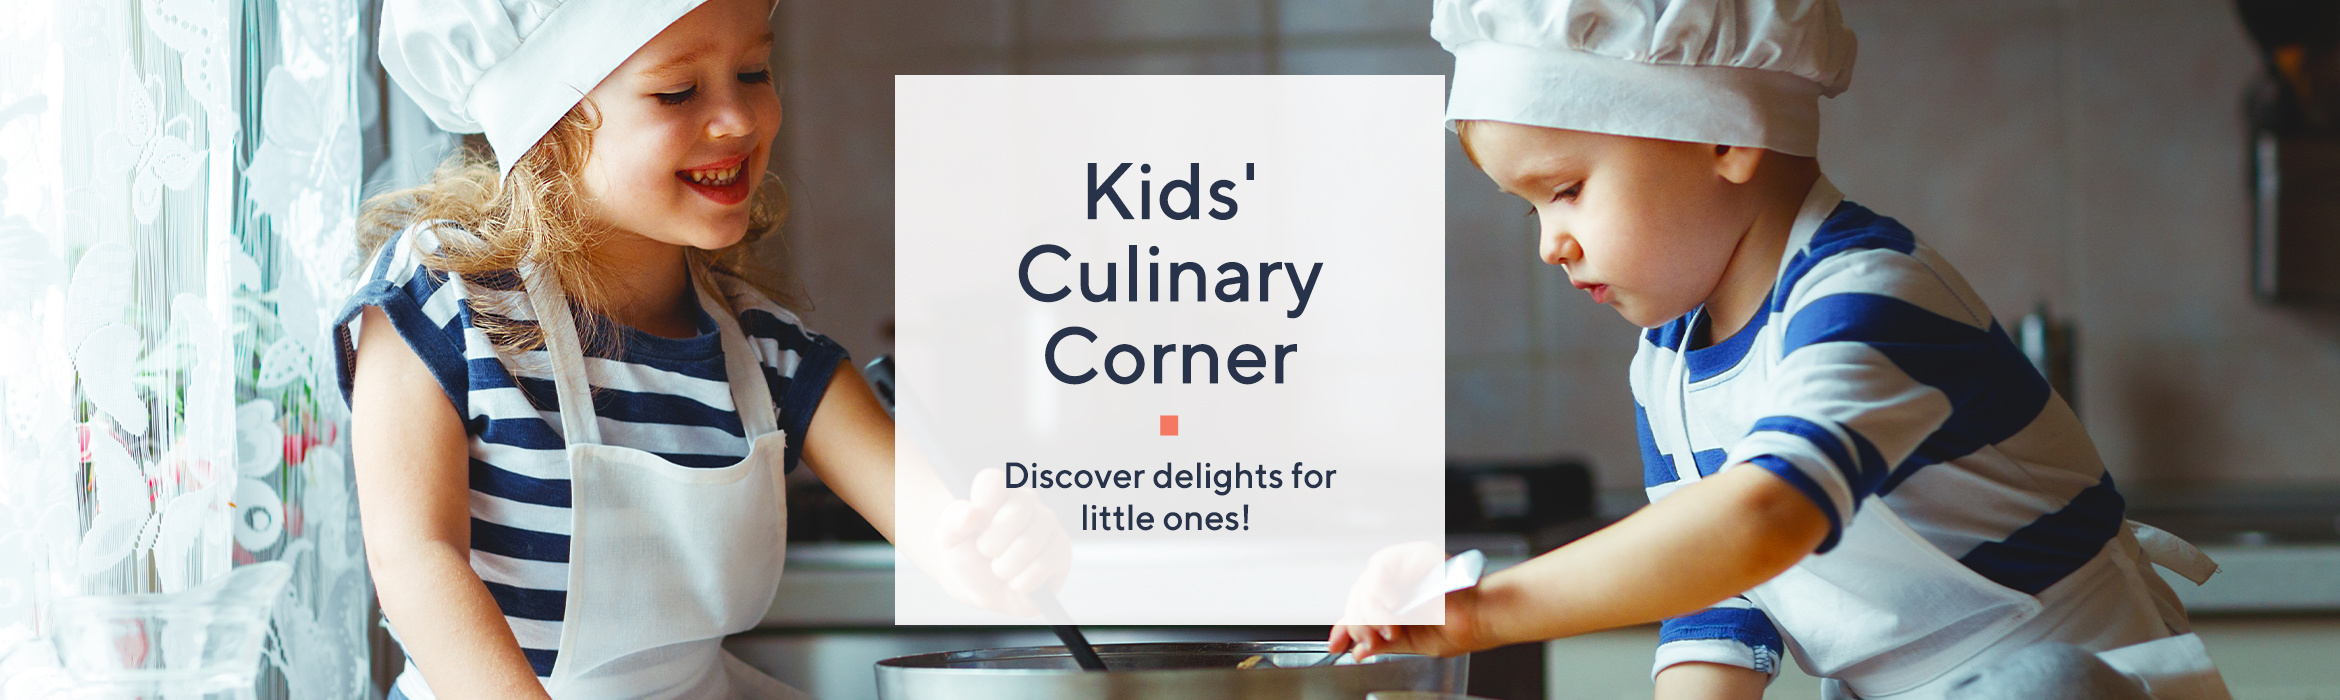 Kids' Culinary Corner.  Discover delights for little ones!